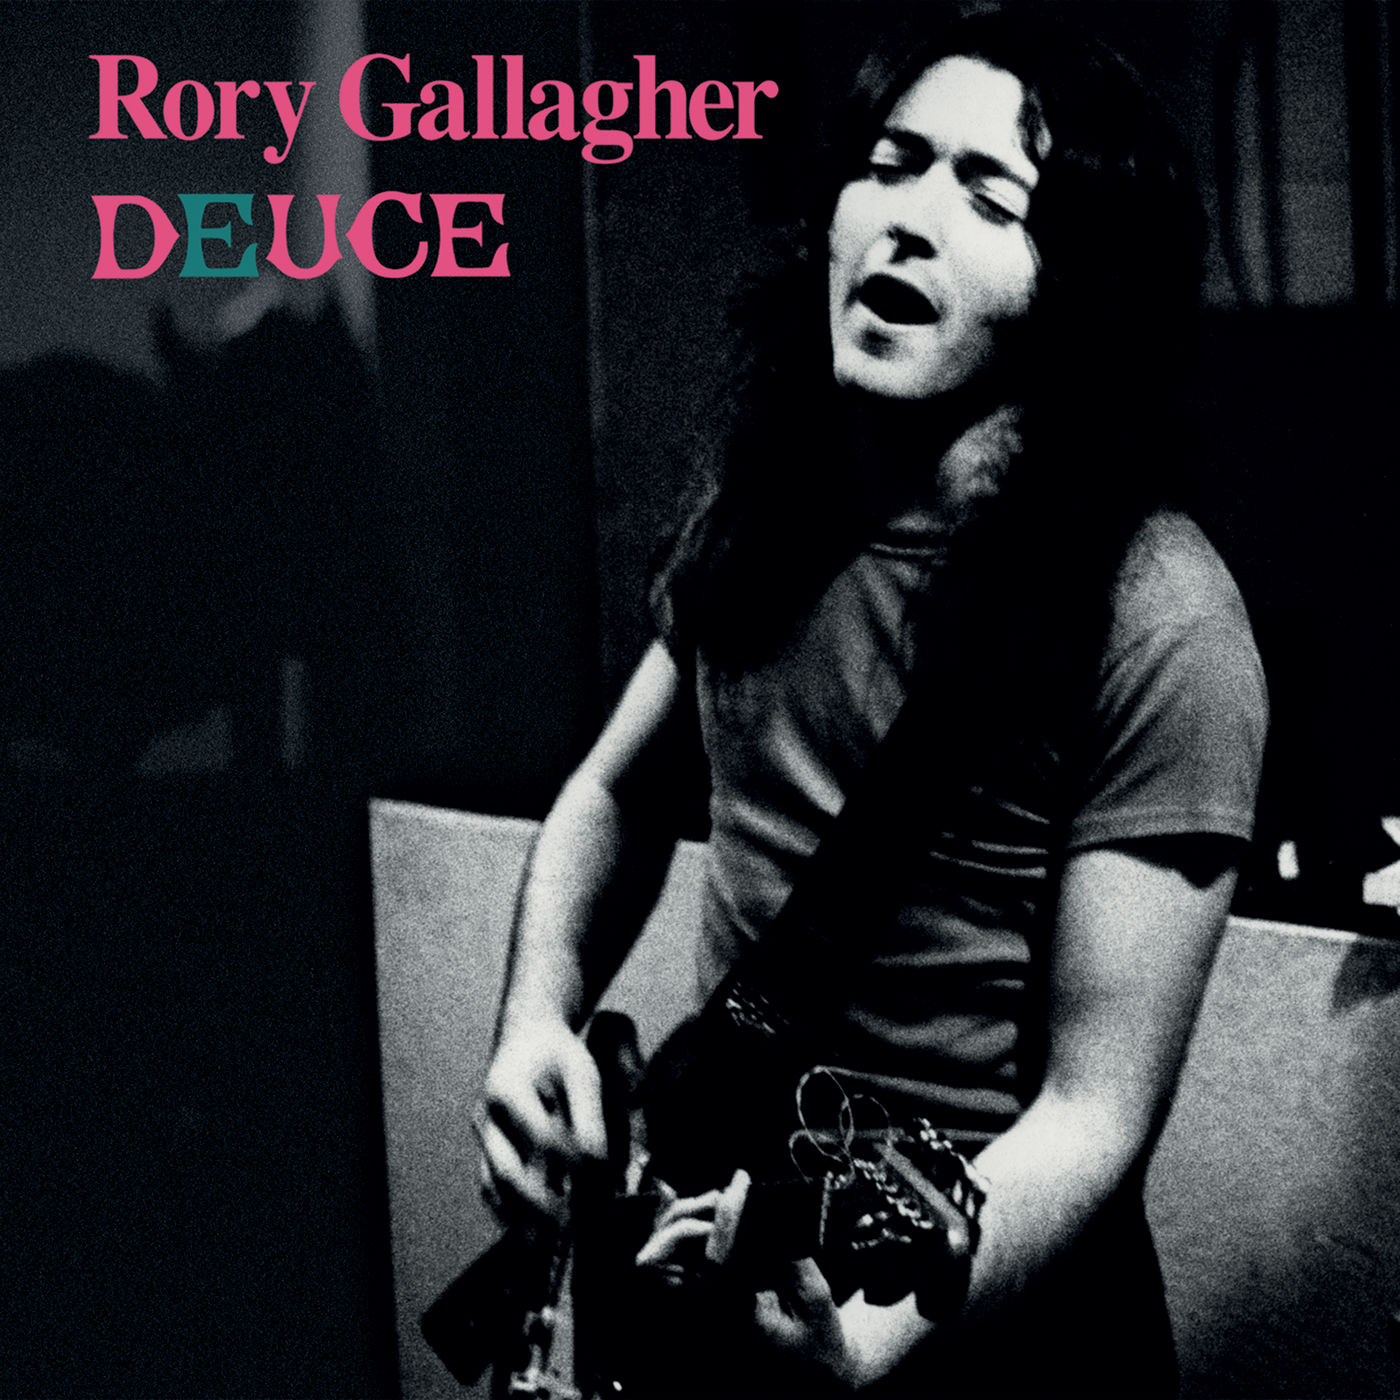 Rory Gallagher - Deuce (Remastered) (1971/2020) [FLAC 24bit/96kHz]